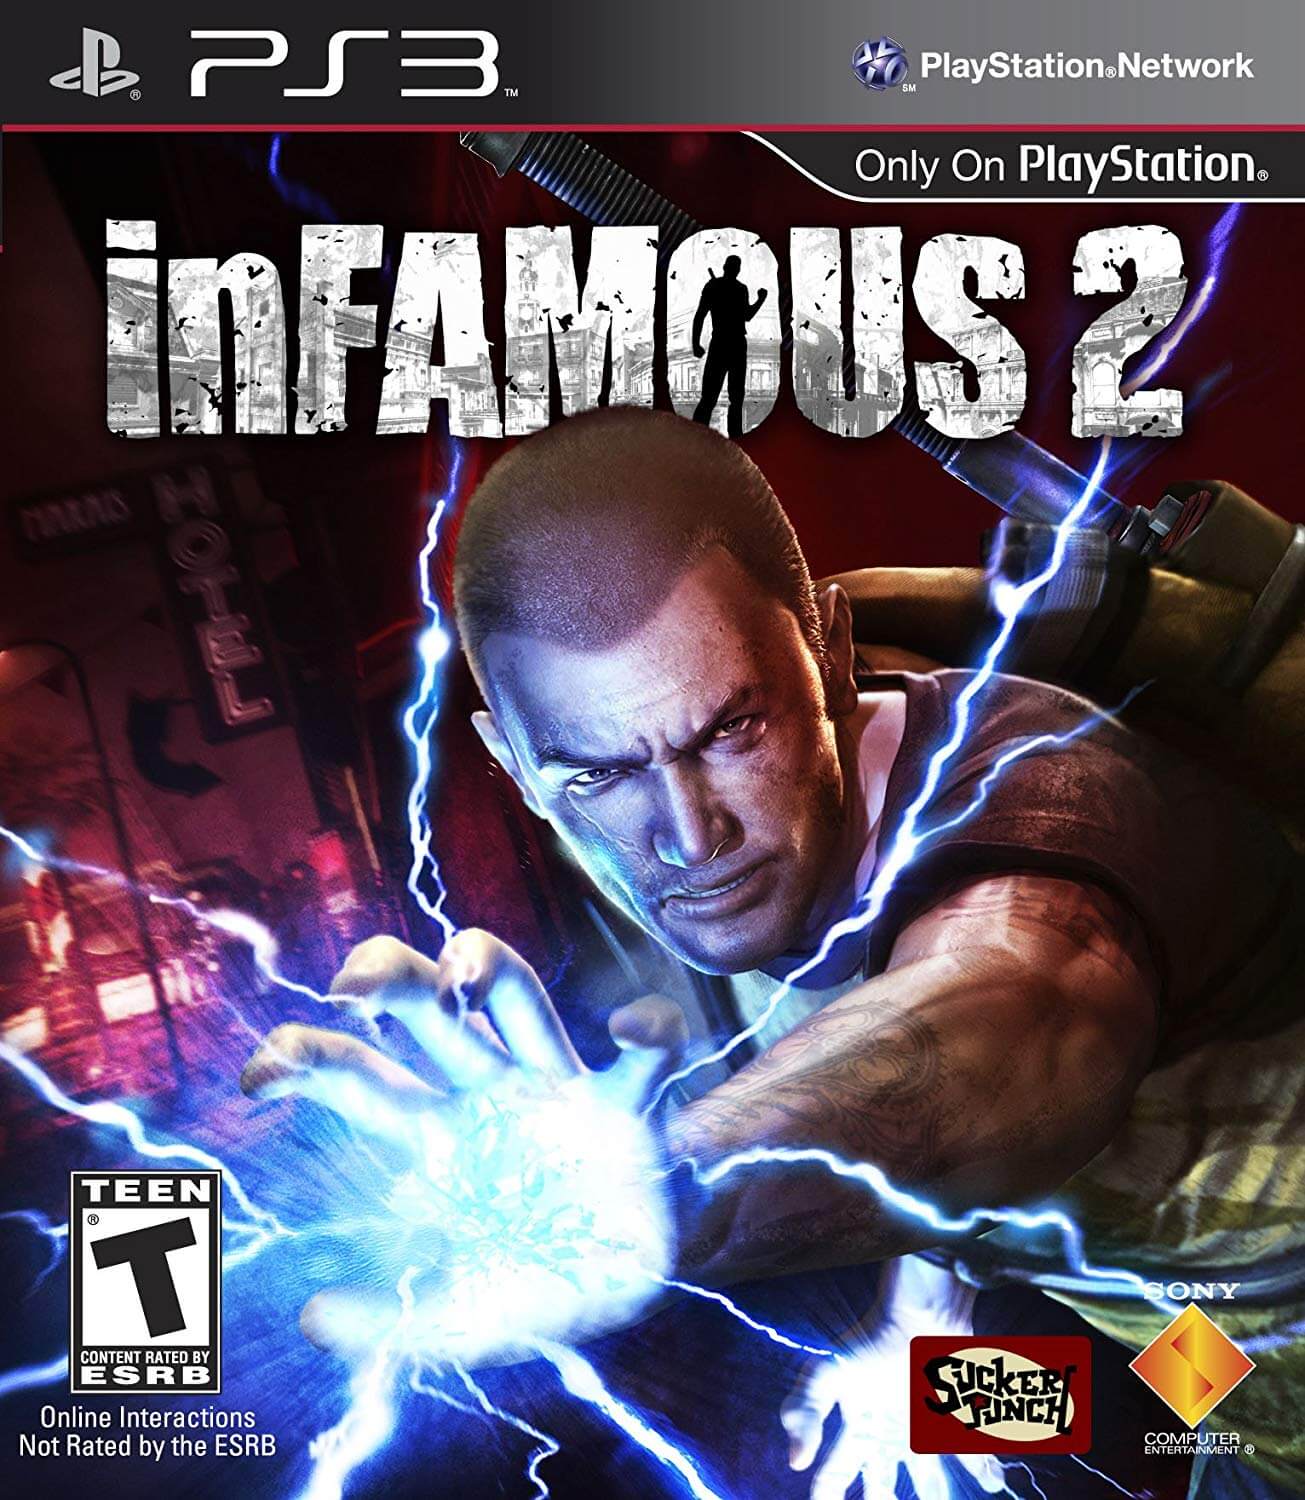 PS3 ROMs FREE Download - Get All Sony PlayStation 3 Games